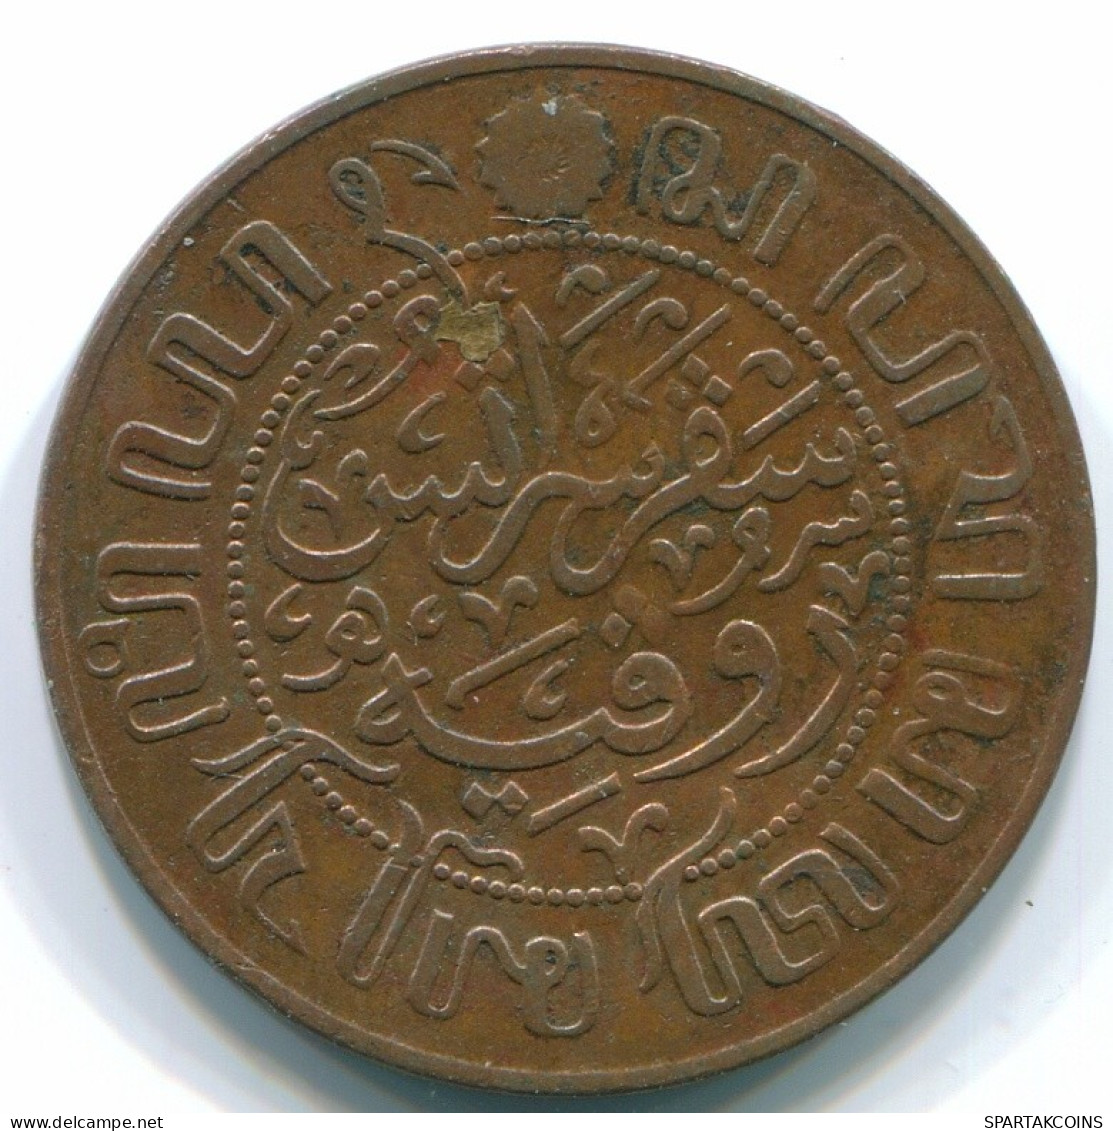 1 CENT 1929 NETHERLANDS EAST INDIES INDONESIA Copper Colonial Coin #S10110.U.A - Indes Neerlandesas